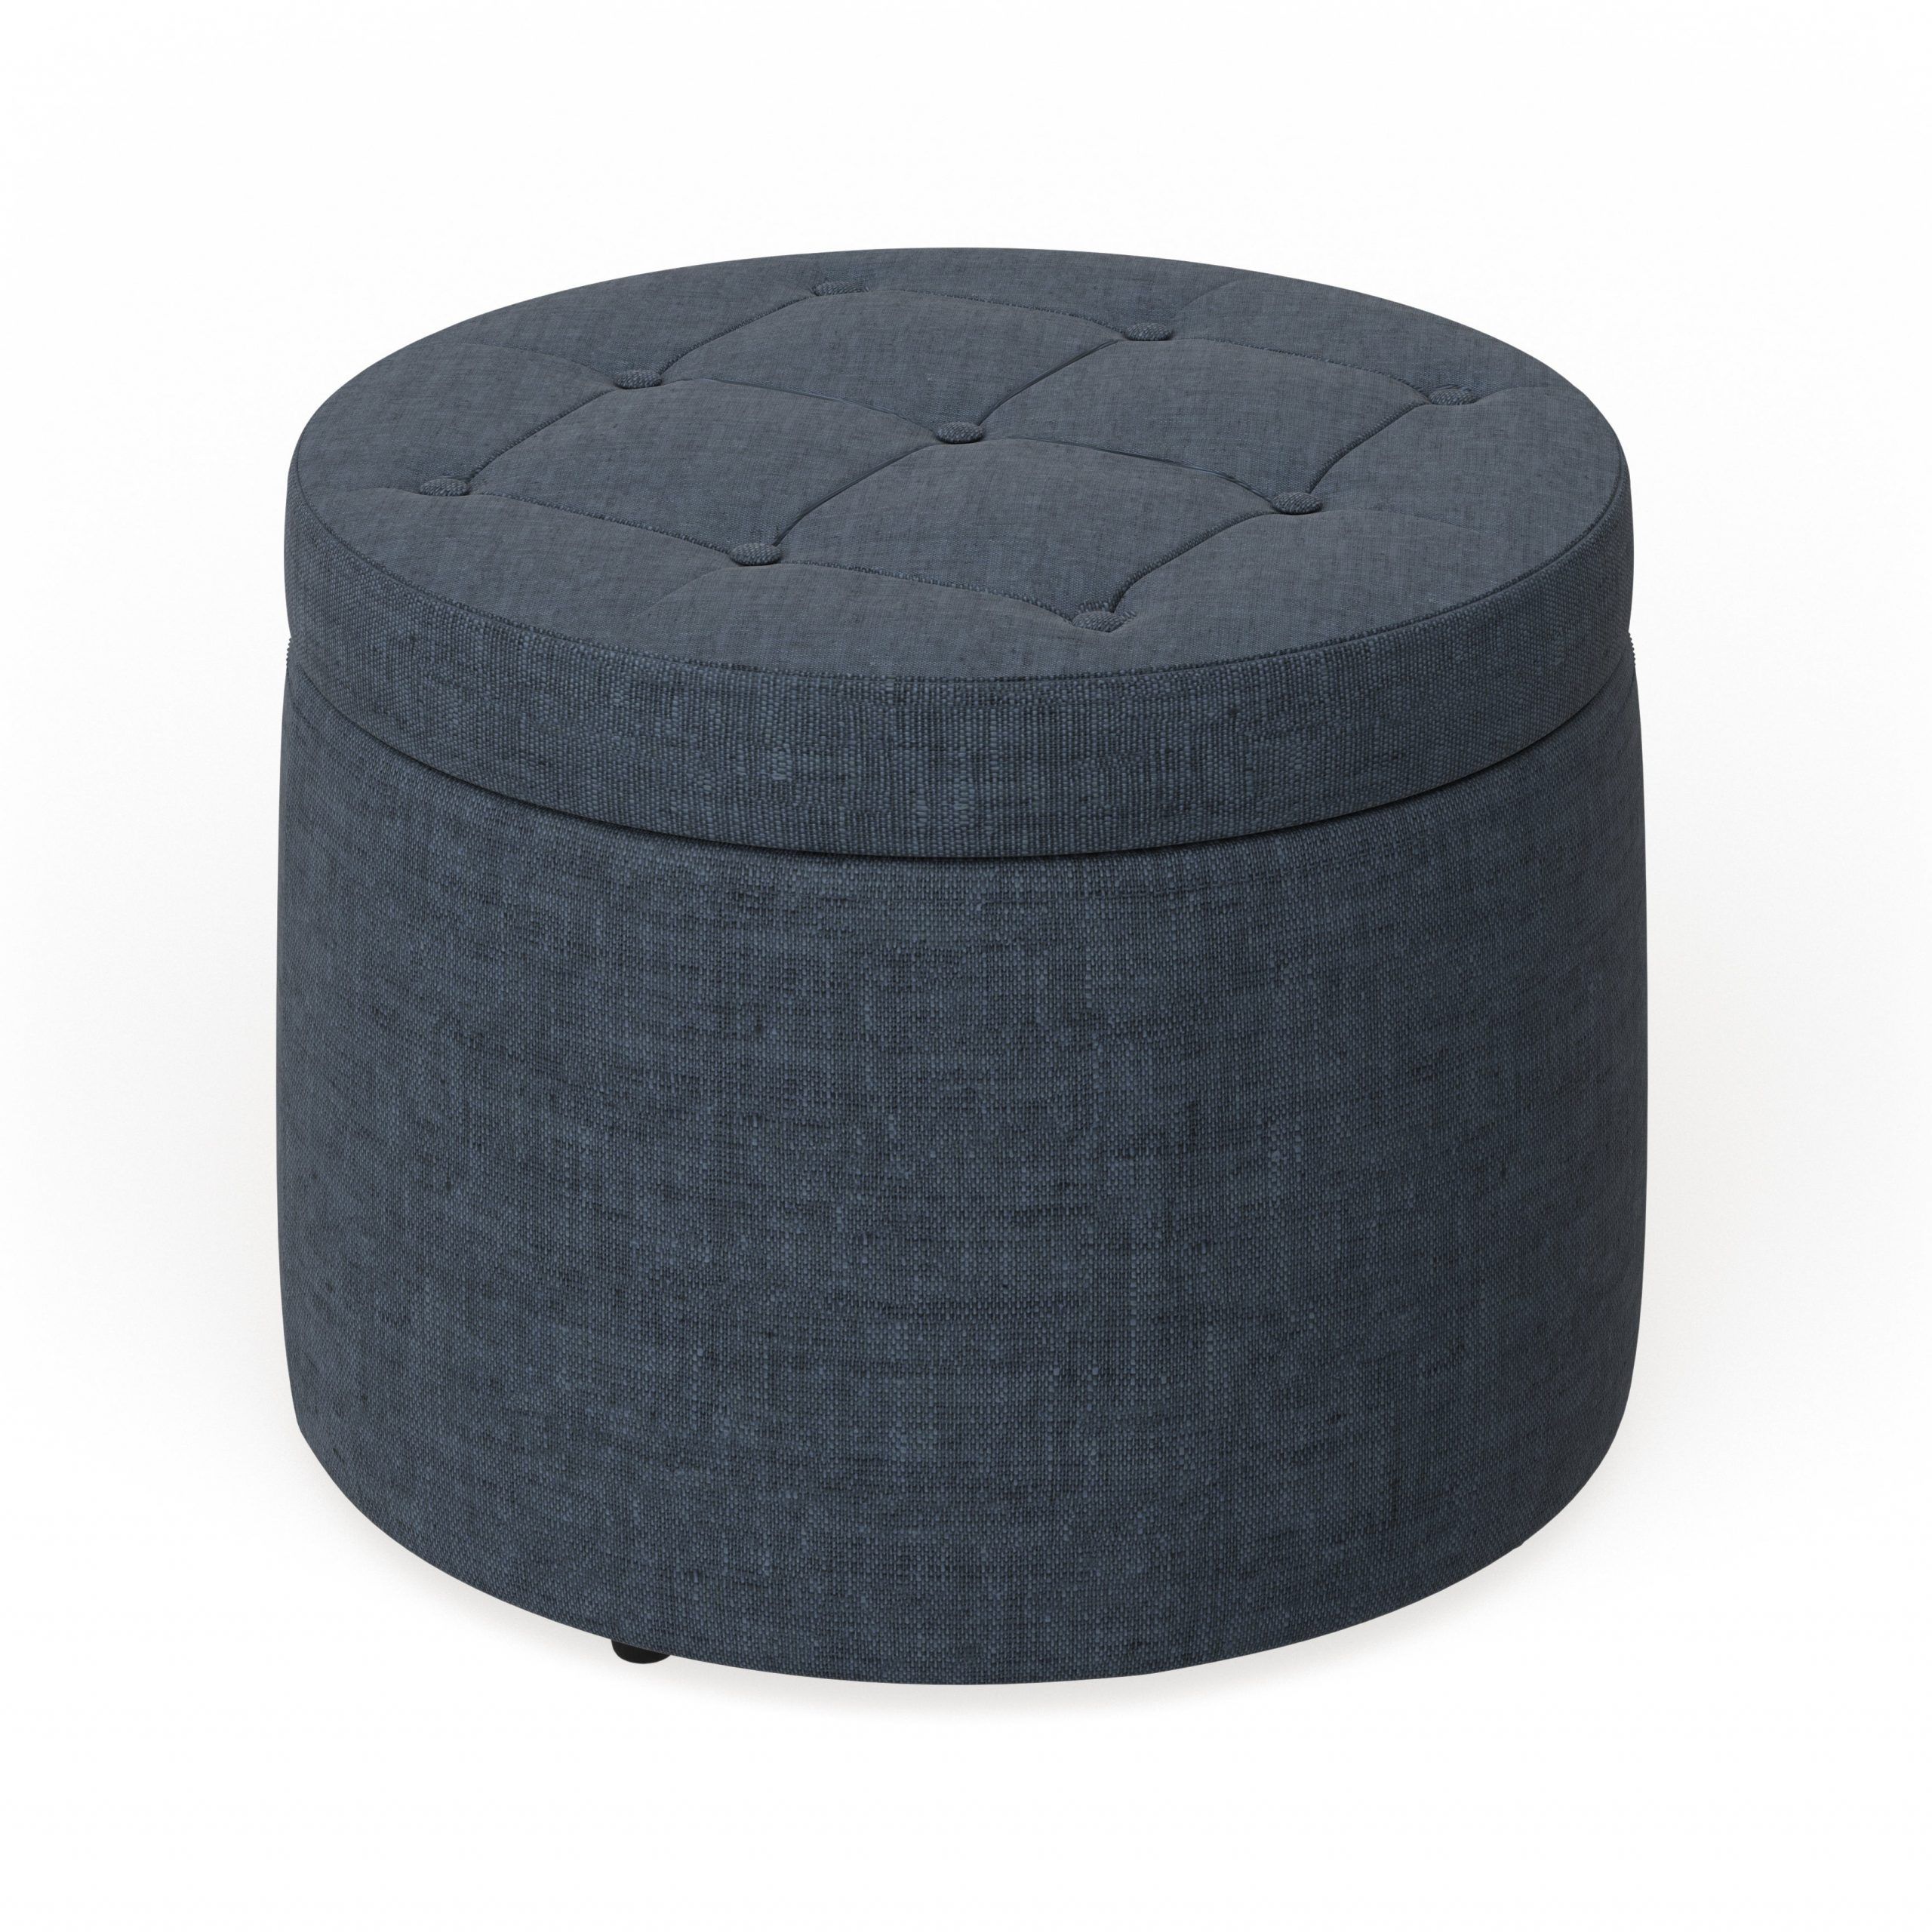 [%porch & Den Deslonde Round Shoe Storage Ottoman [18036358] – $38.99 For Preferred Round Gray Faux Leather Ottomans With Pull Tab|round Gray Faux Leather Ottomans With Pull Tab With Most Recently Released Porch & Den Deslonde Round Shoe Storage Ottoman [18036358] – $38.99|latest Round Gray Faux Leather Ottomans With Pull Tab Inside Porch & Den Deslonde Round Shoe Storage Ottoman [18036358] – $38.99|trendy Porch & Den Deslonde Round Shoe Storage Ottoman [18036358] – $ (View 4 of 10)